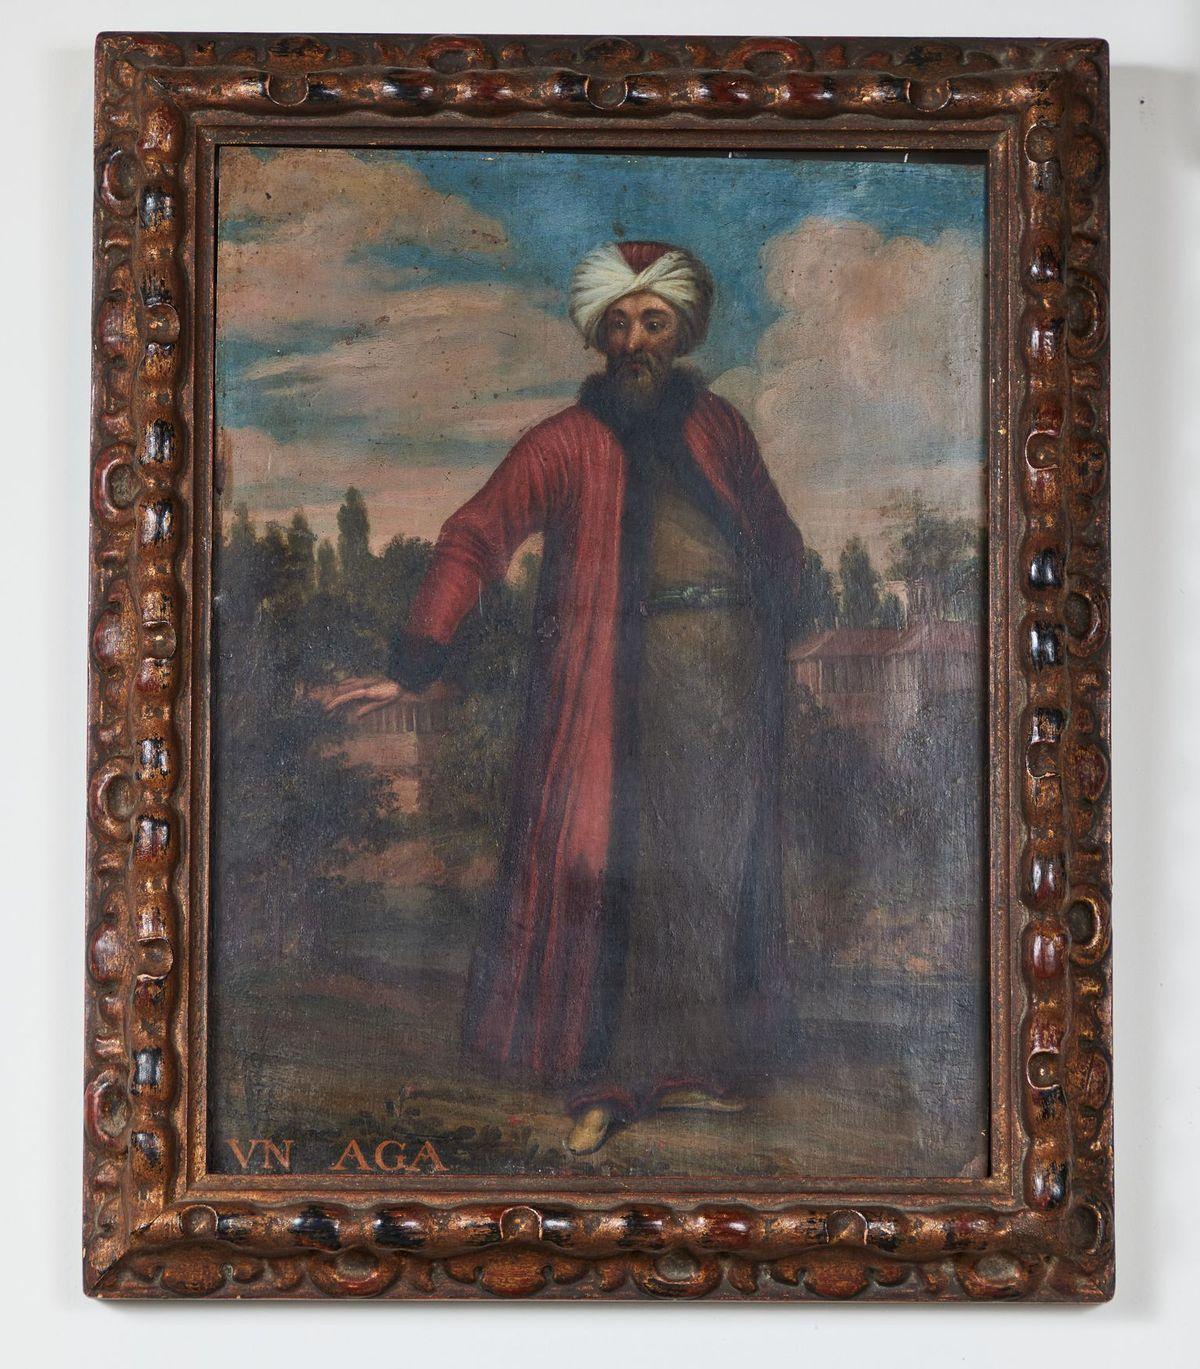 A remarkable trio of 18th century, oil-on-copper paintings of, Ottoman Empire figures in colorful robes and accouterments, posing in European style landscapes. Each figure is labeled on the lower left, and reveals their rank in an elite infantry